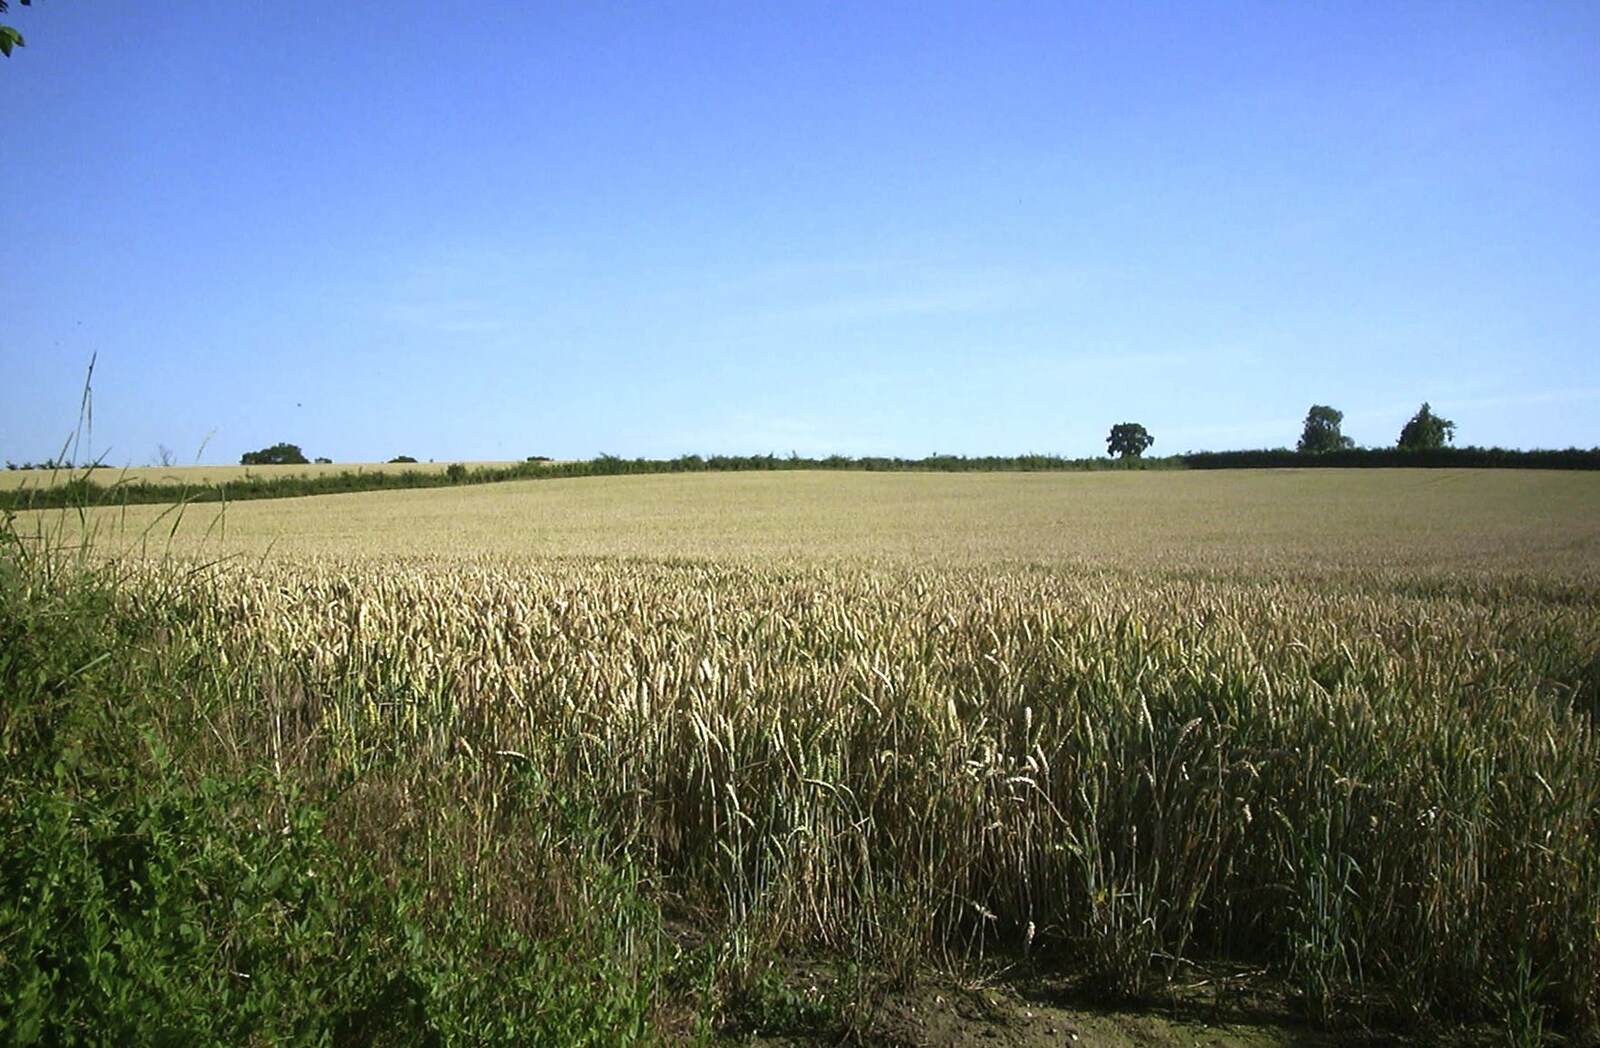 Rolling Suffolk wheat fields from The BSCC Annual Bike Ride, Orford, Suffolk - 12th July 2003